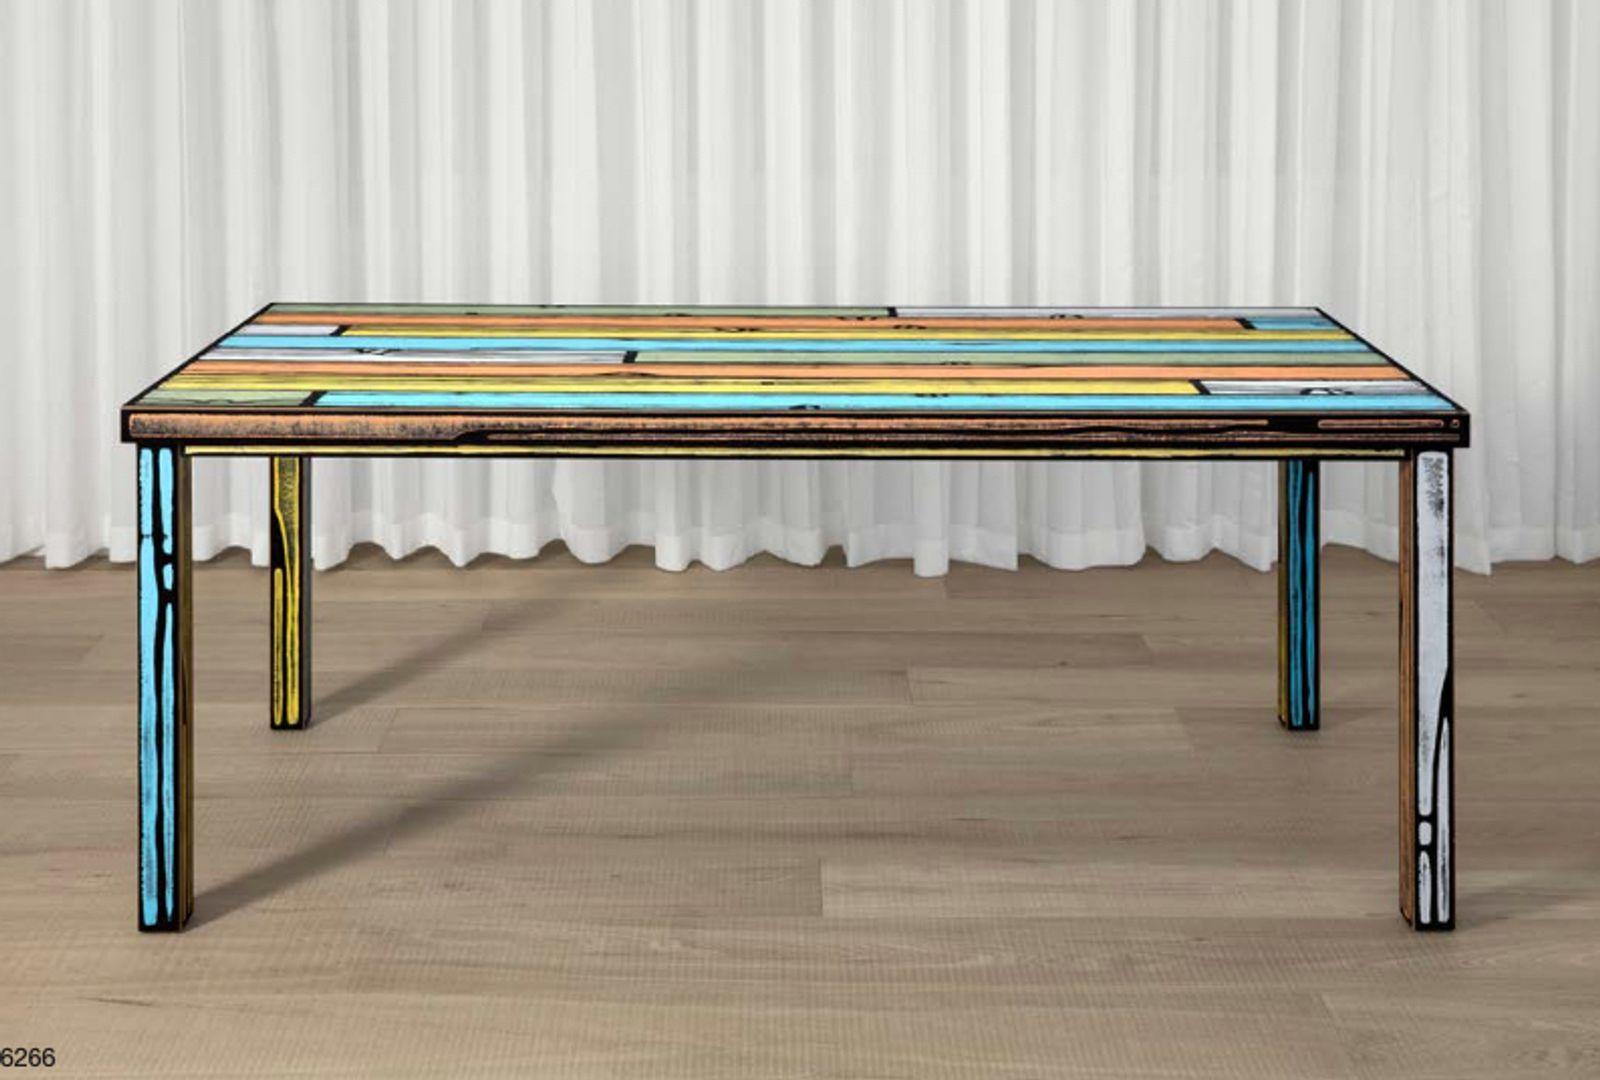 Richard Woods’ strikingly colourful woodgrain block prints are applied to Sebastian Wrong’s utilitarian furniture – reminiscent of mid-century designs – in this seminal collaboration between artist and designer.

RICHARD WOODS
BRITISH ARTIST BORN